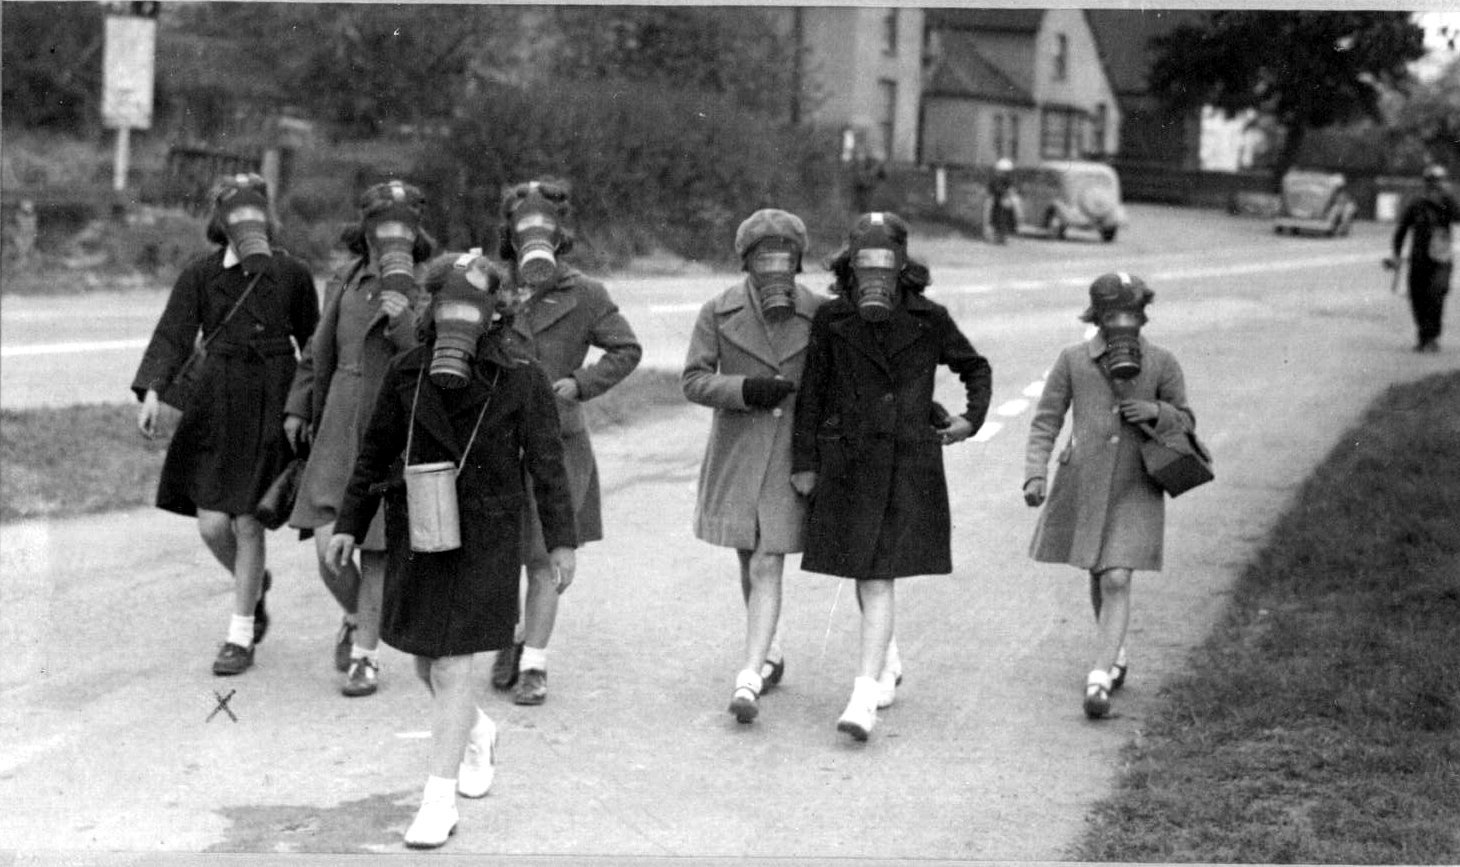 this is a group of girls walking down the street